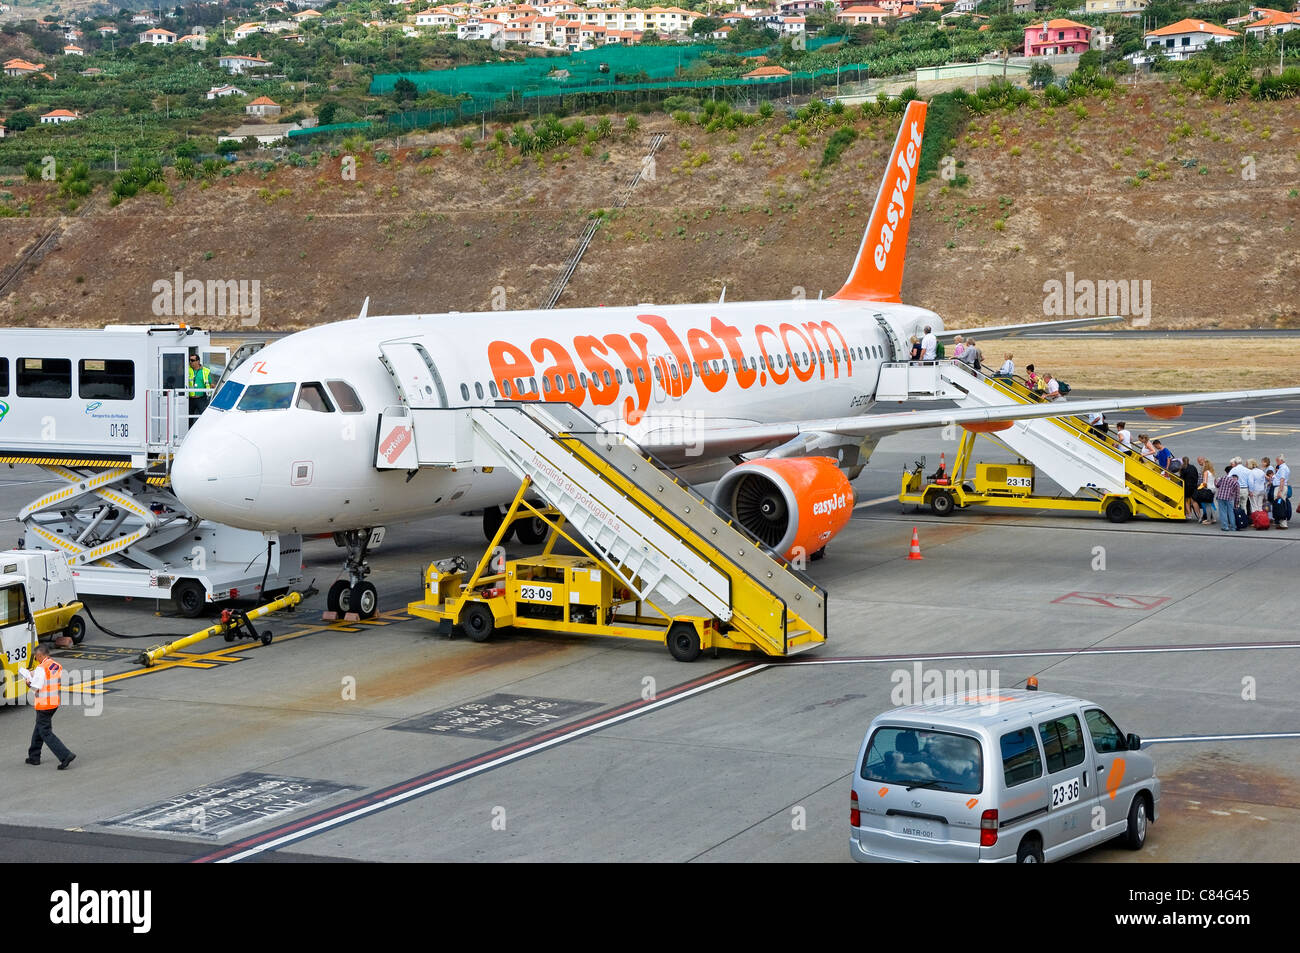 Passengers people tourists visitors boarding EasyJet plane airplane aircraft at Funchal airport Madeira Portugal EU Europe Stock Photo